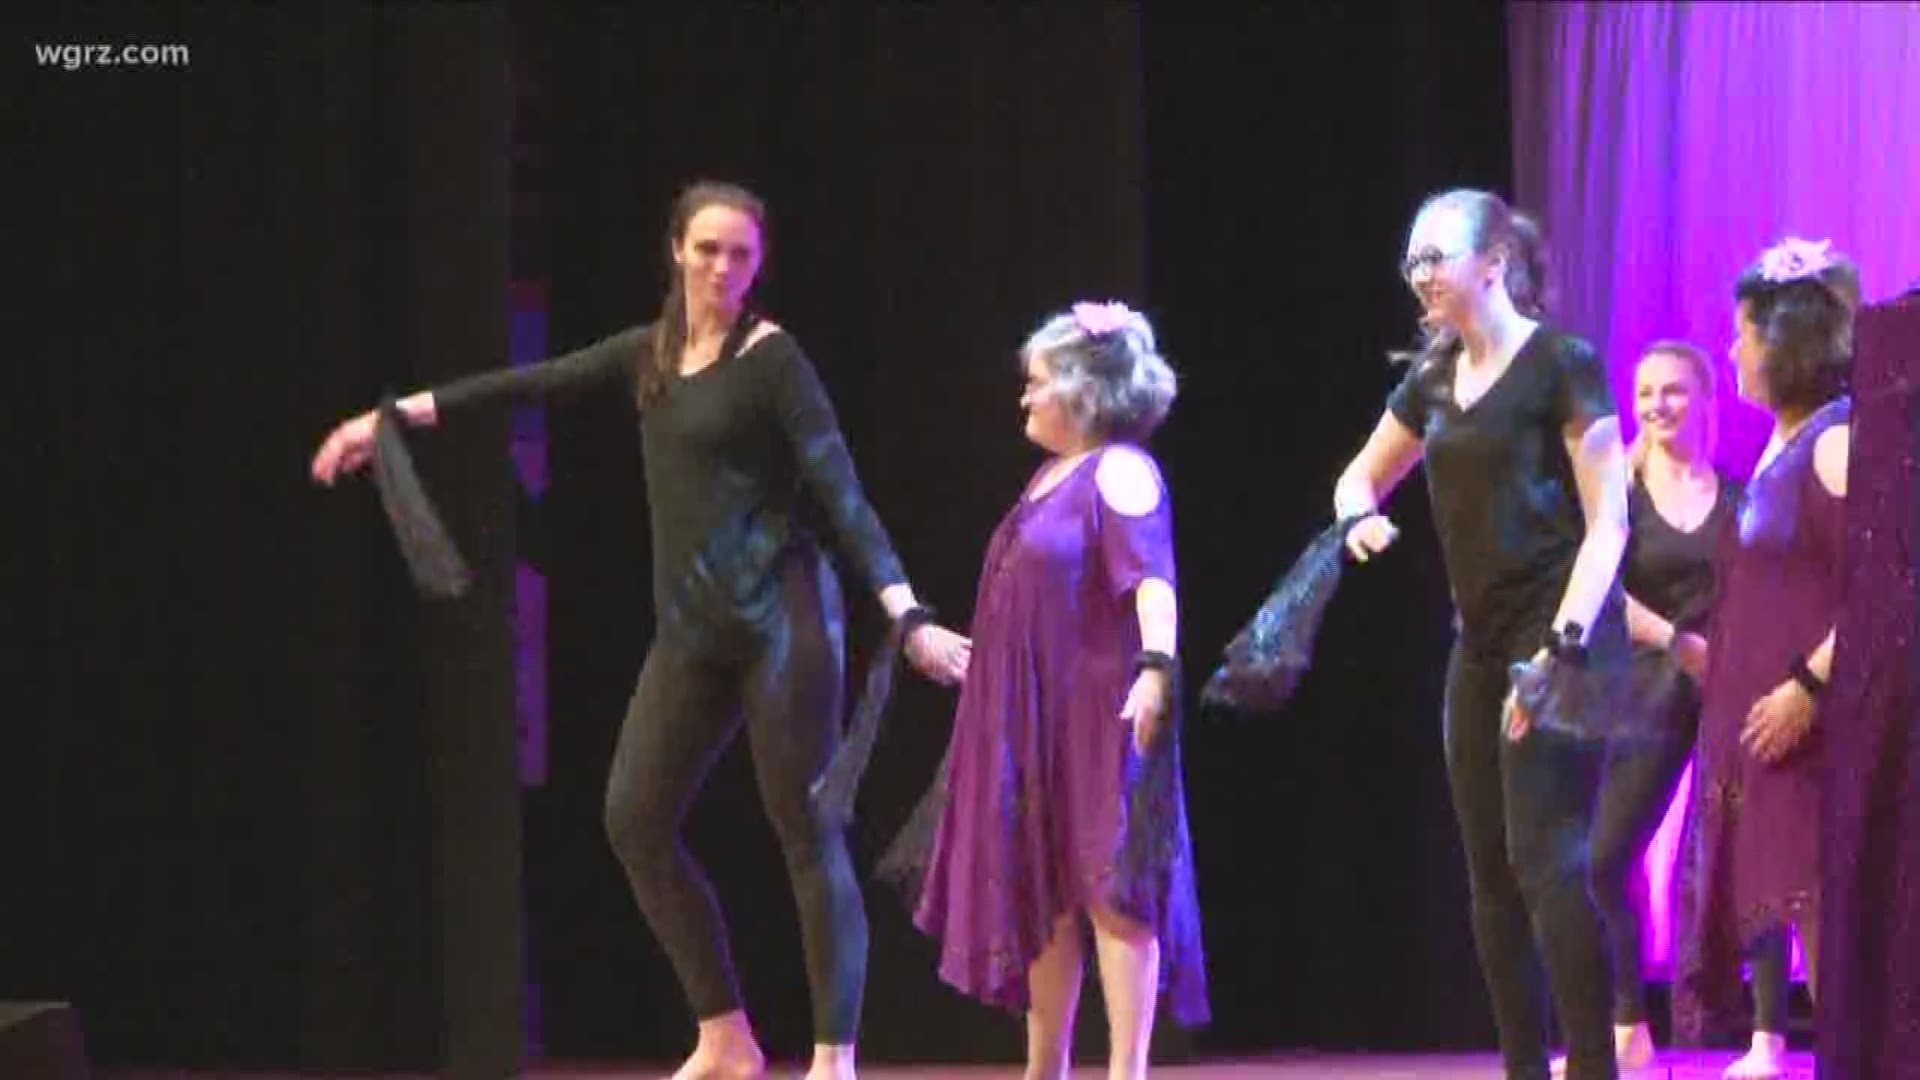 It's a dance and movement program for those with special needs, and it's a day the dancers work all year for.